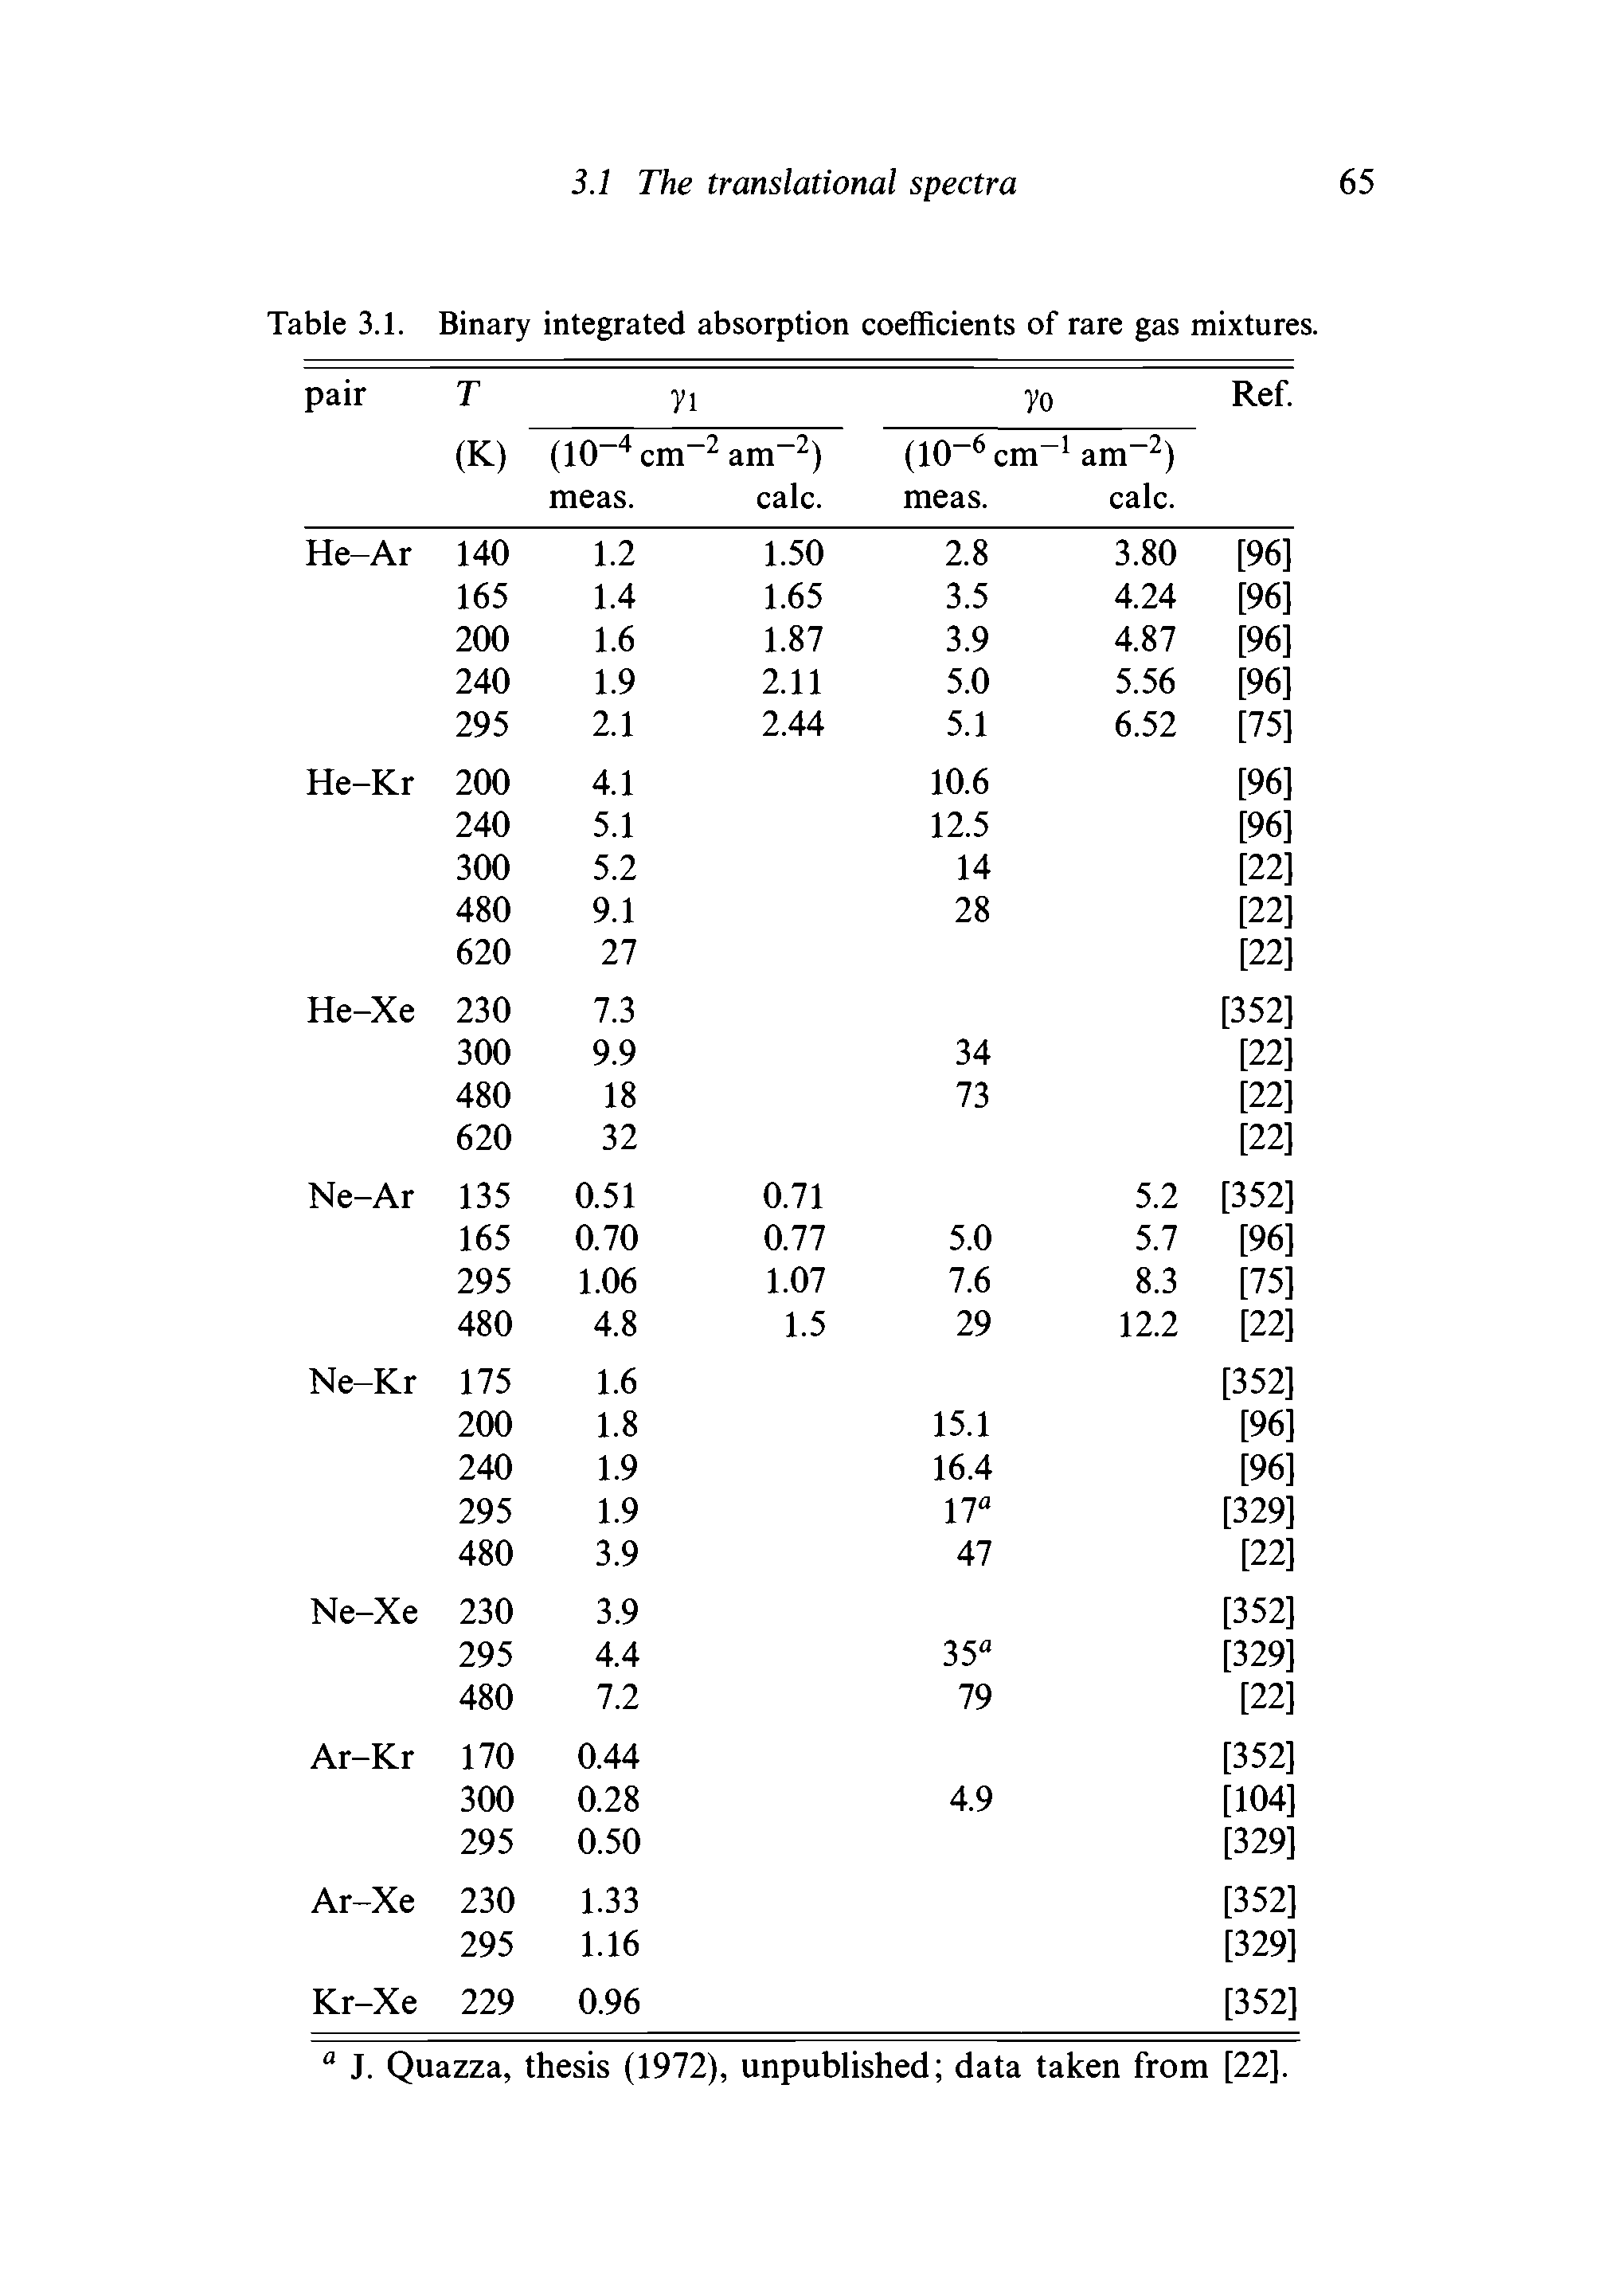 Table 3.1. Binary integrated absorption coefficients of rare gas mixtures.